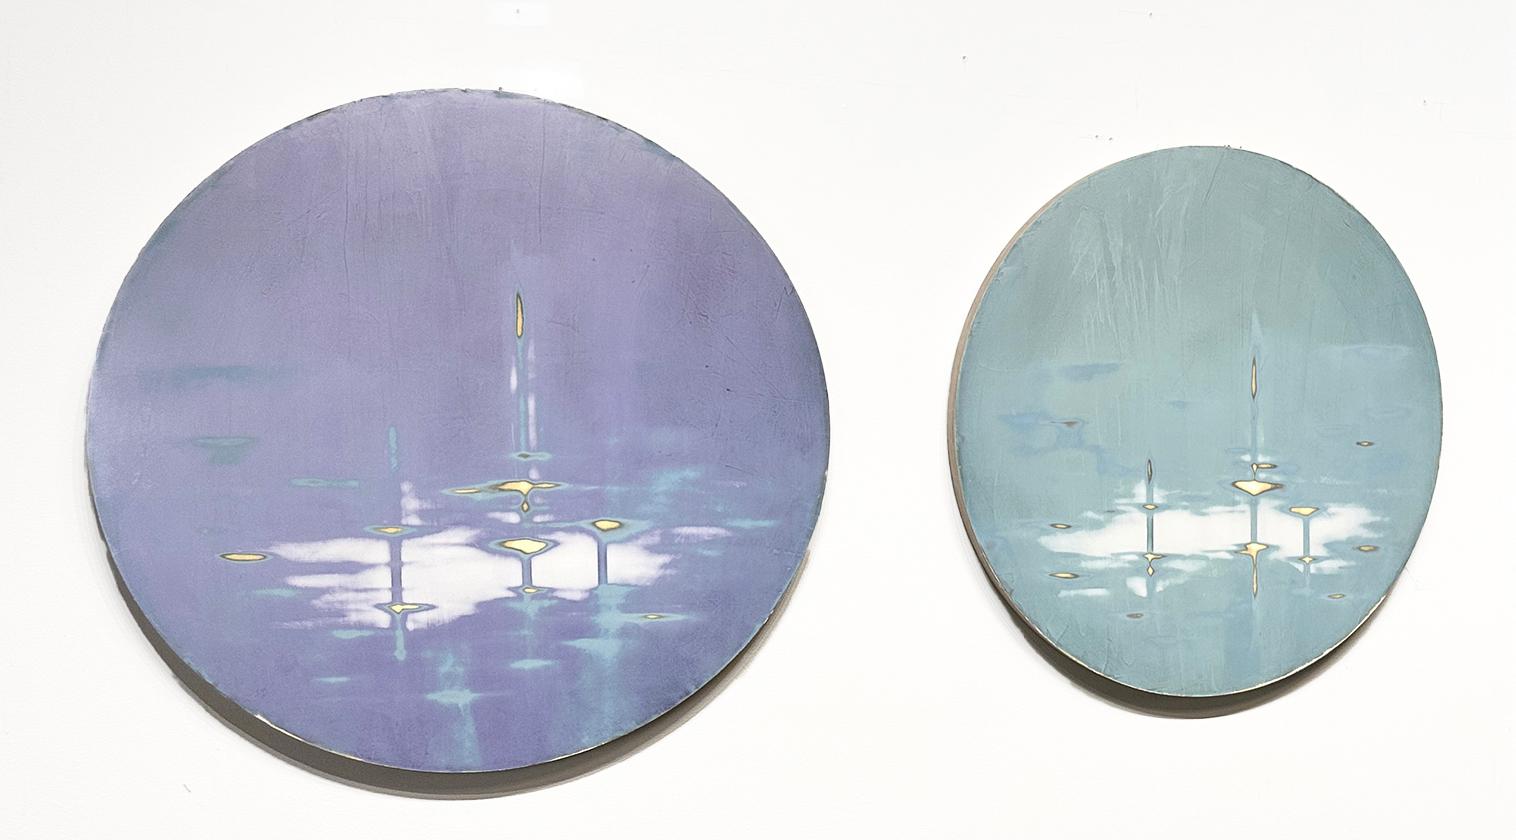 AUDRA WEASER
"Ocean Flight Diptych"
Acrylic, Metallic Pigments, Plaster Paint on Panel
30 x 30 in. Each  30 x 60 in. Overall
___________________

Utilizing a minimalist color palette, Weaser’s process-based paintings are excavations of memories